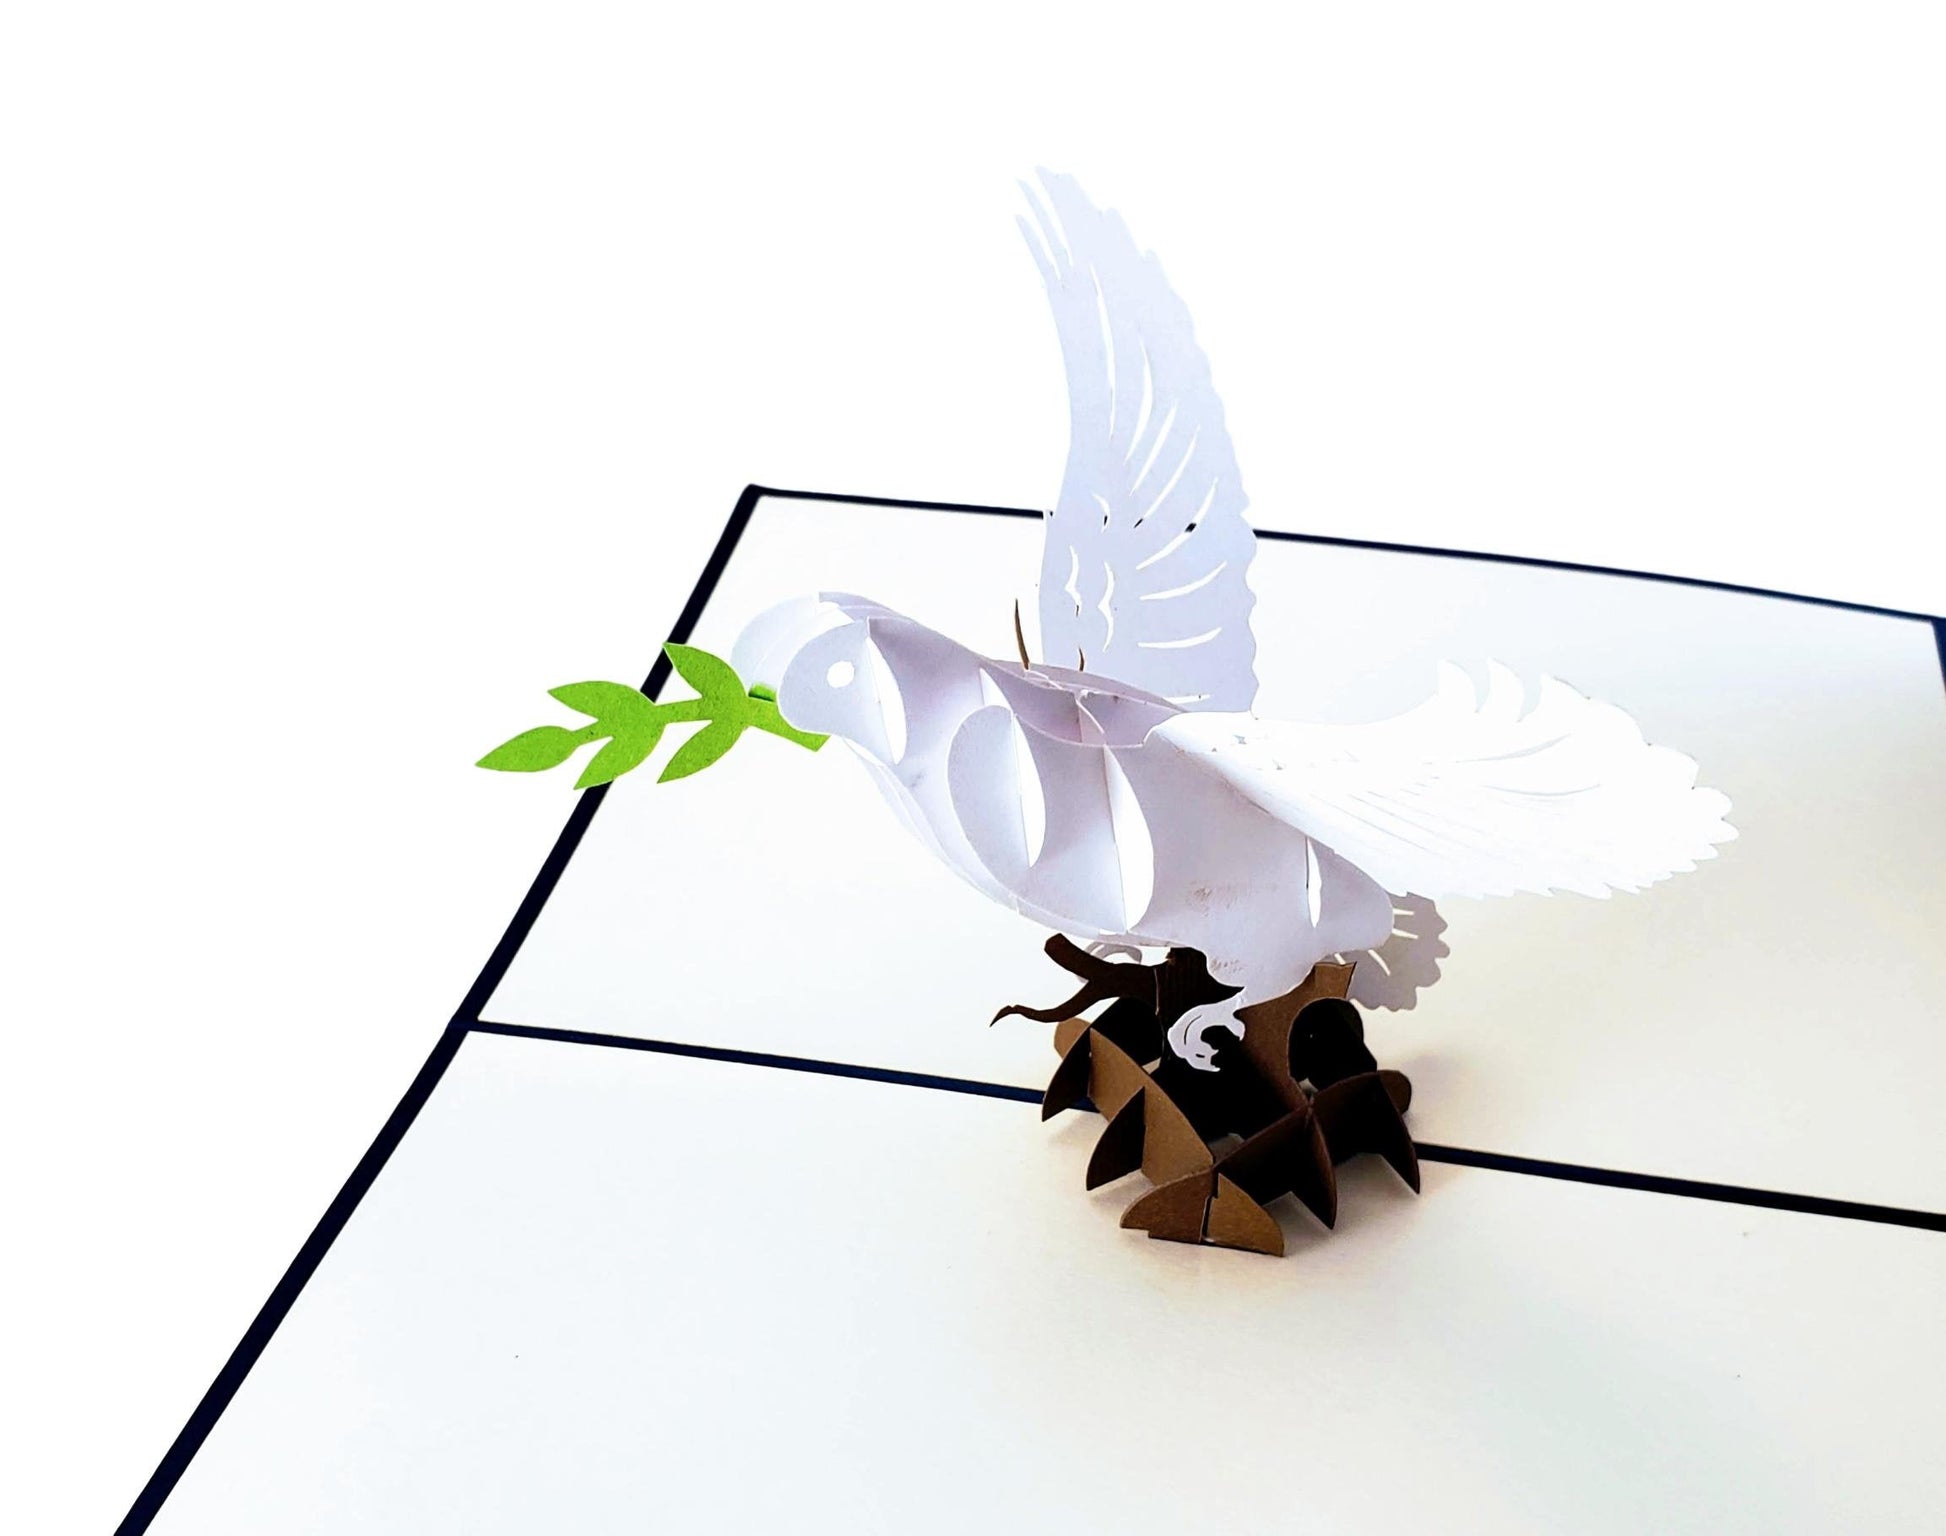 Holy Dove With Olive Branch 3D Pop Up Greeting Card - Christmas - iGifts And Cards